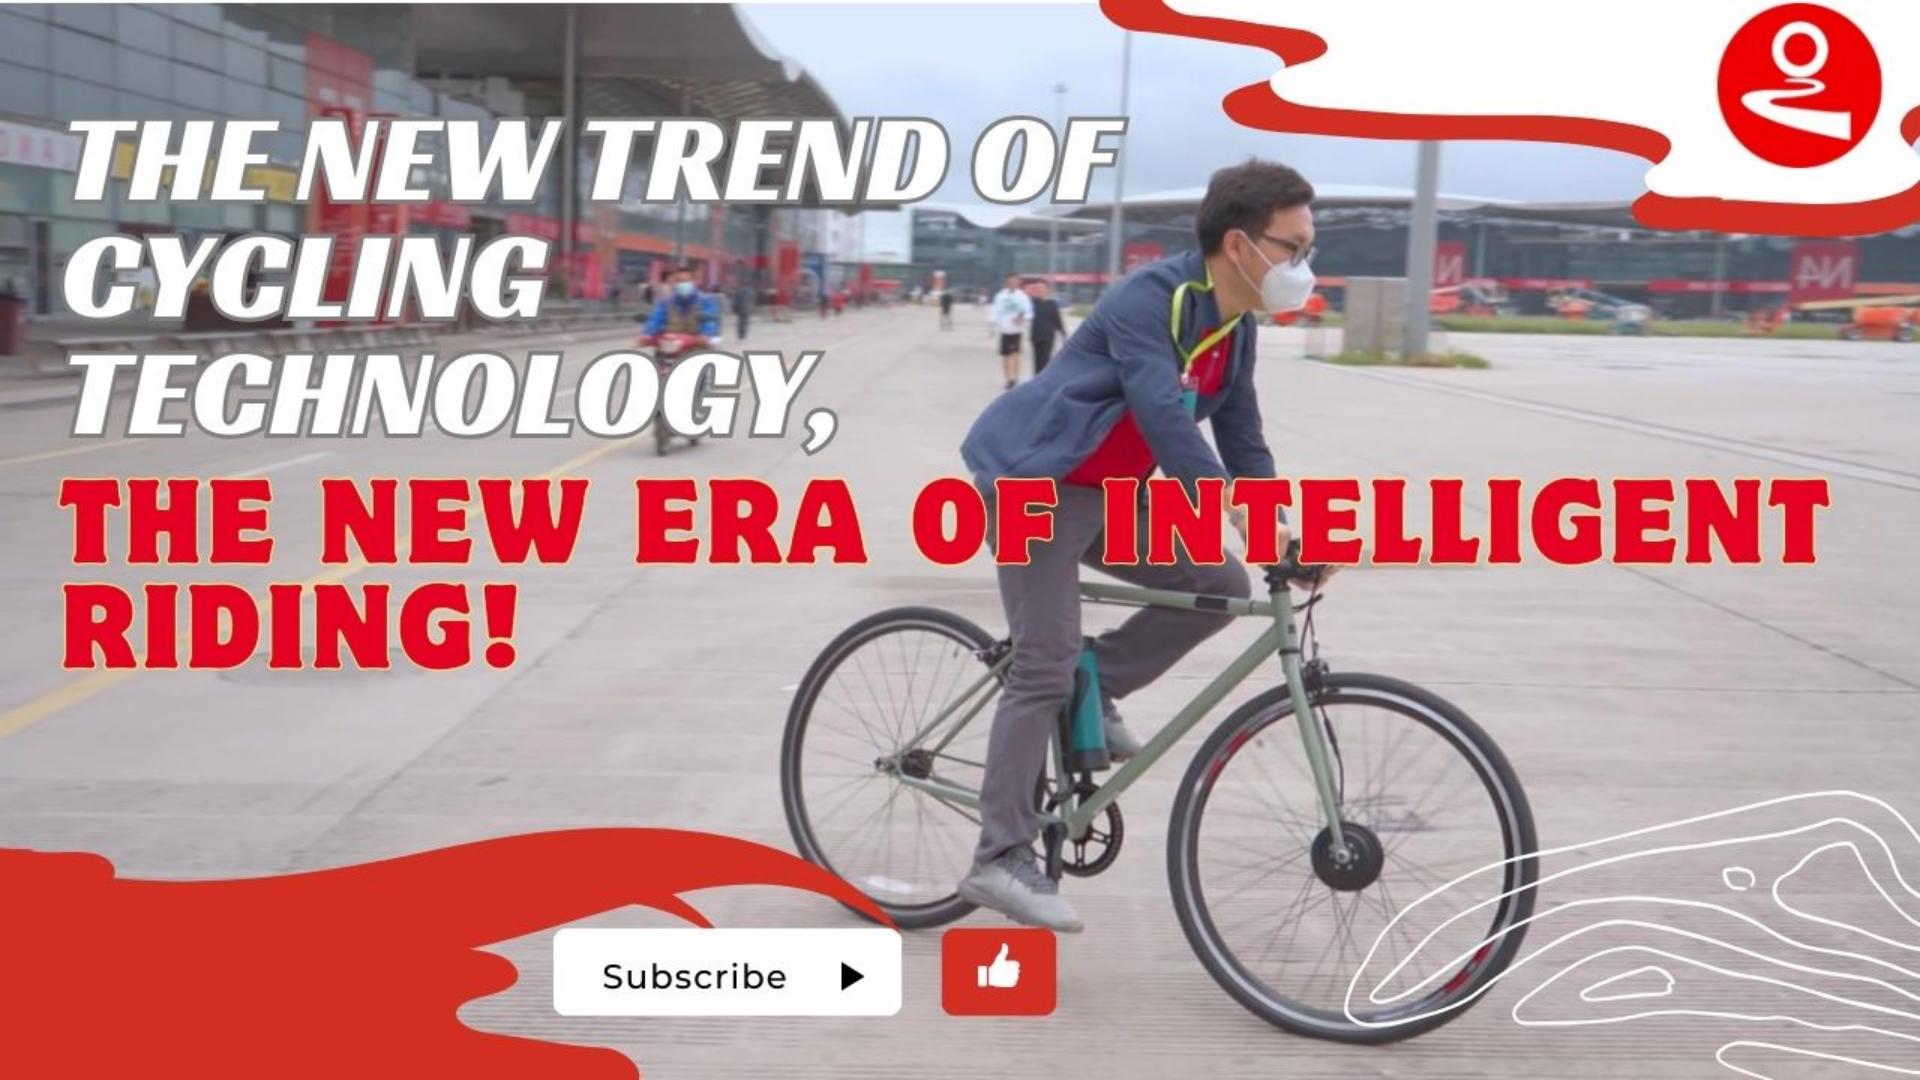 The new trend of cycling technology, the new era of intelligent riding